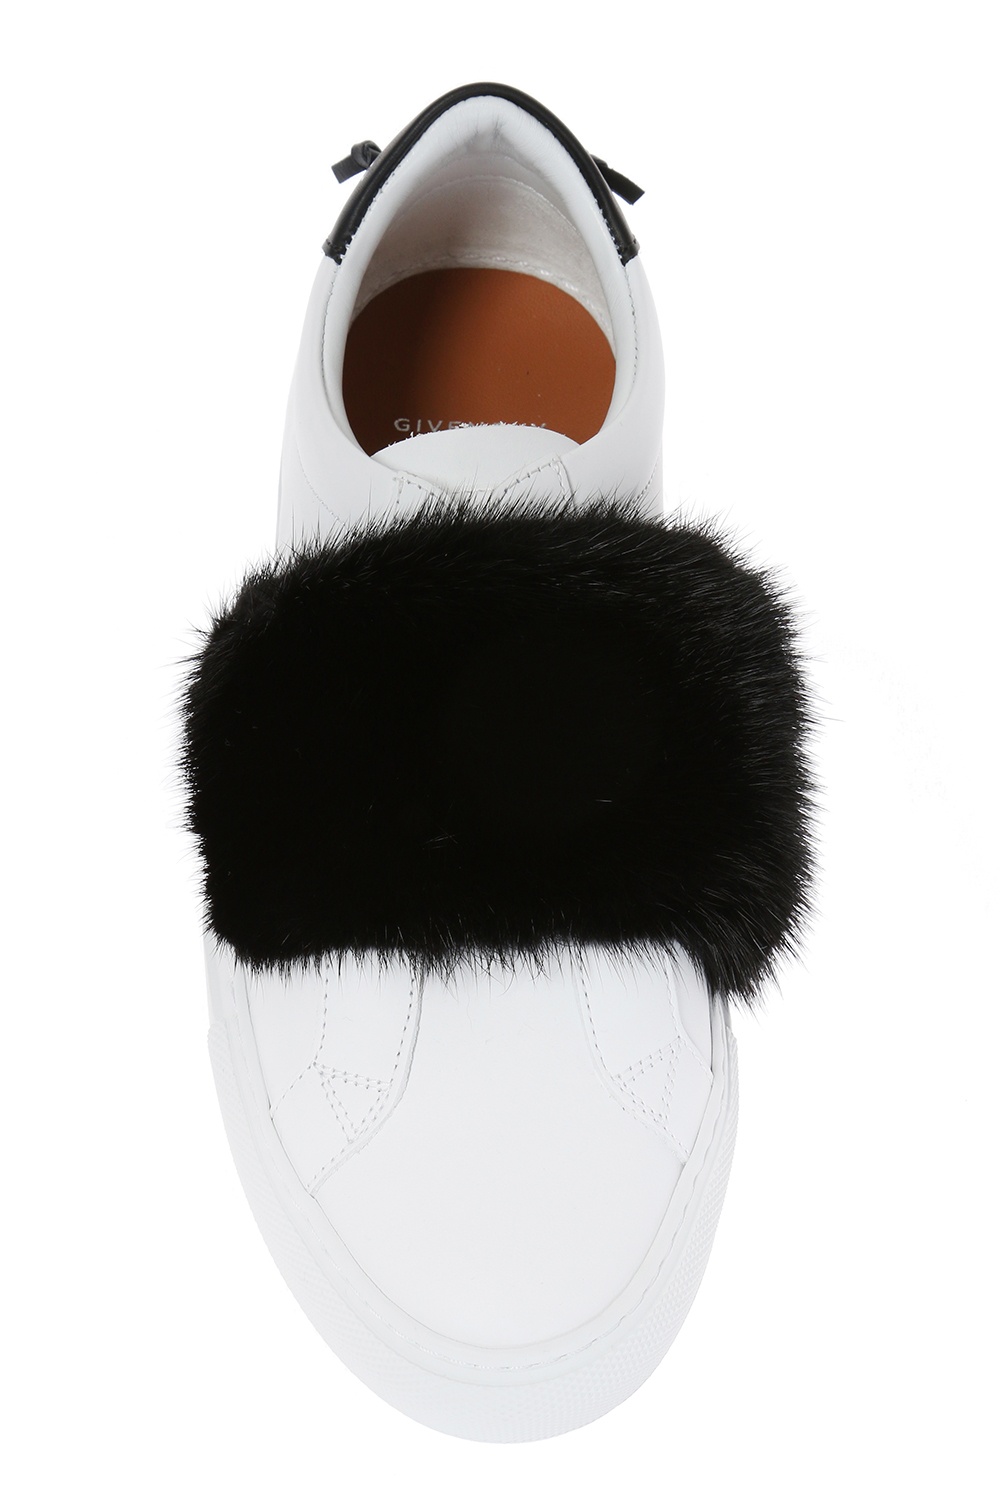 givenchy sneakers fur